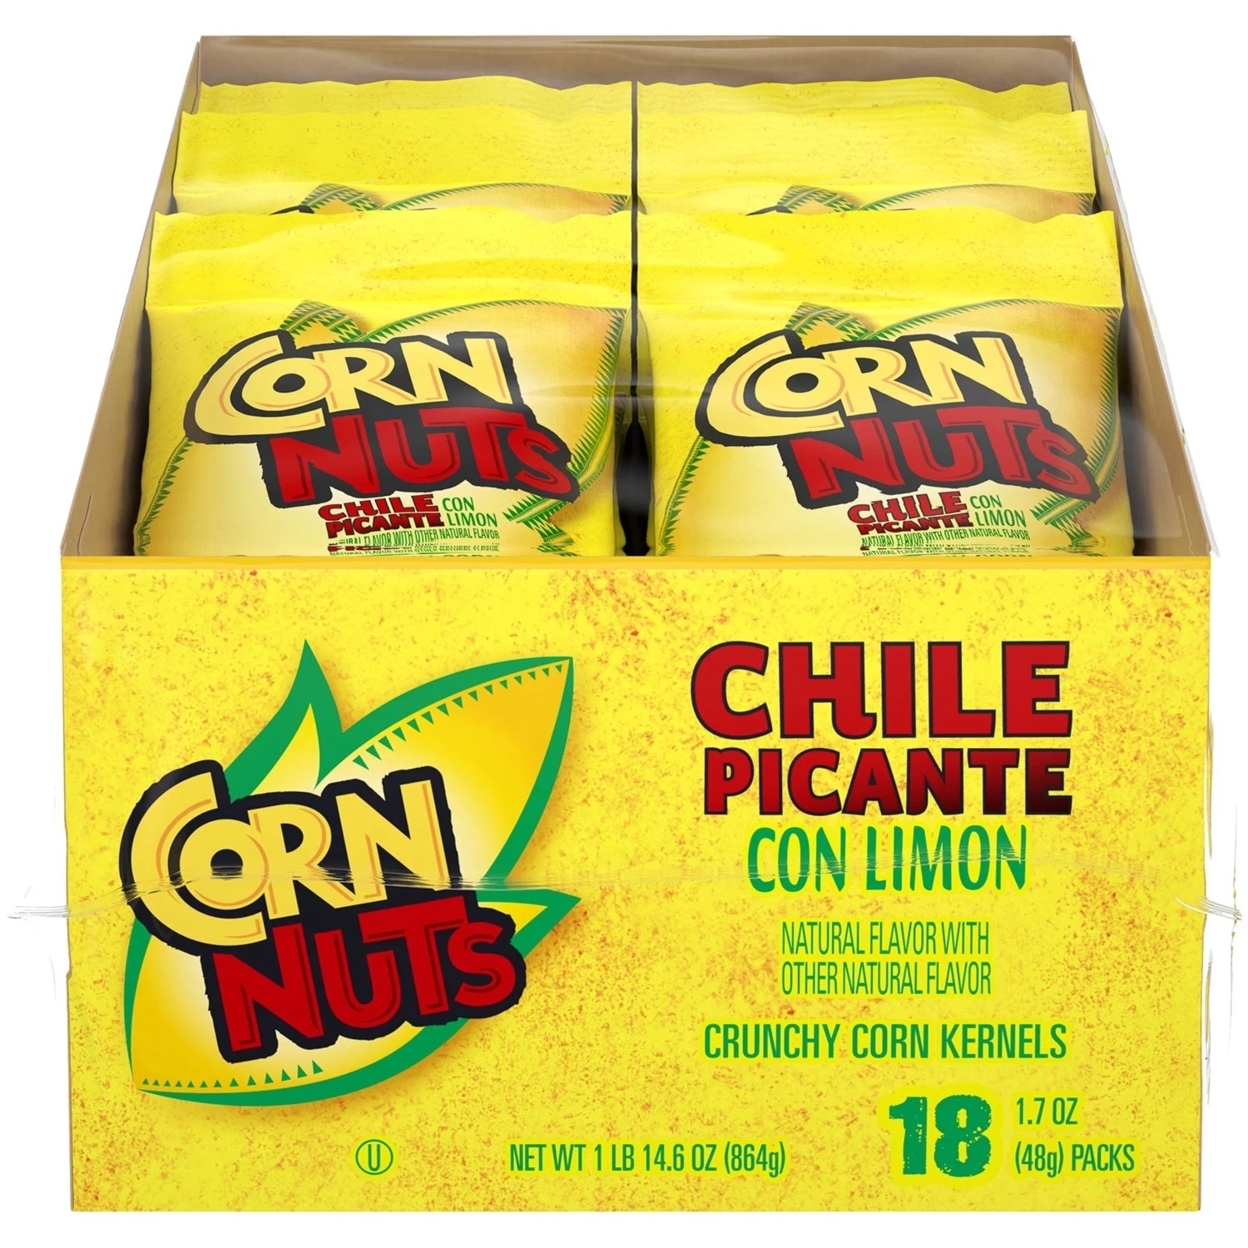 Corn Nuts Chile Picante Con Limon Crunchy Corn Kernels, 1.7 Ounce (Pack Of 18)